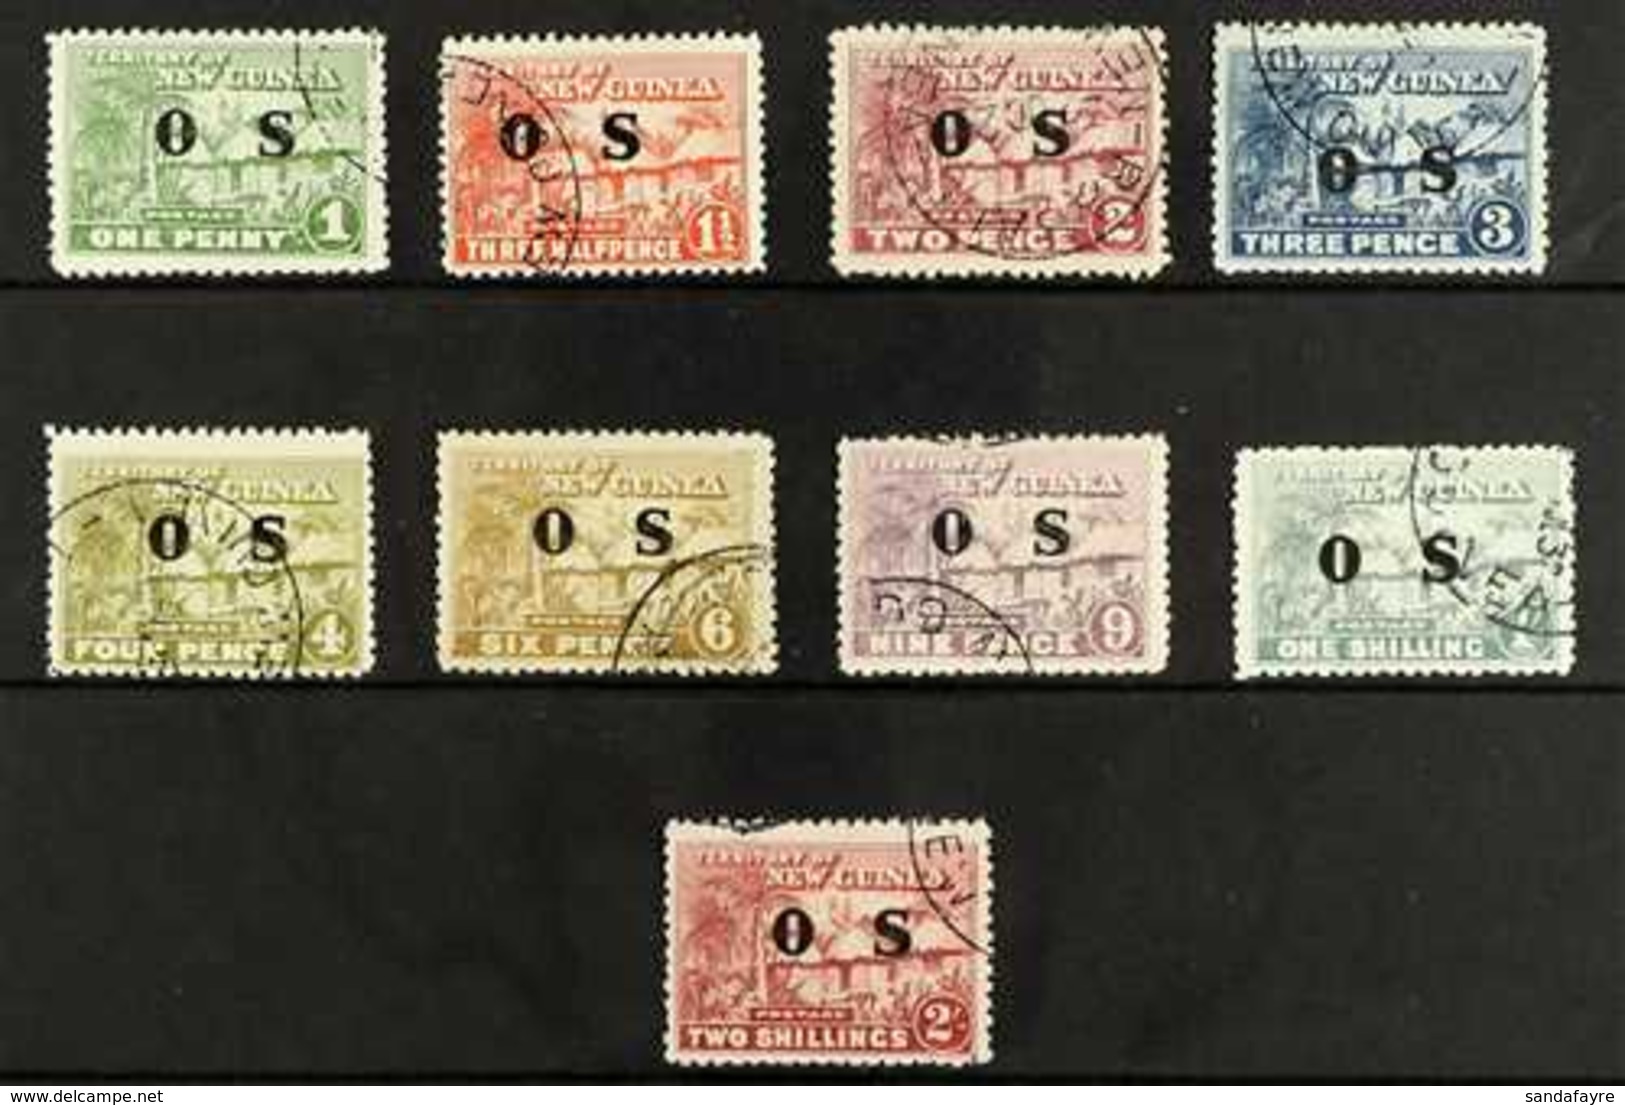 OFFICIALS 1925-31 Native Village With "O S" Overprints Complete Set, SG O22/30, Fine Cds Used, Fresh. (9 Stamps) For Mor - Papouasie-Nouvelle-Guinée